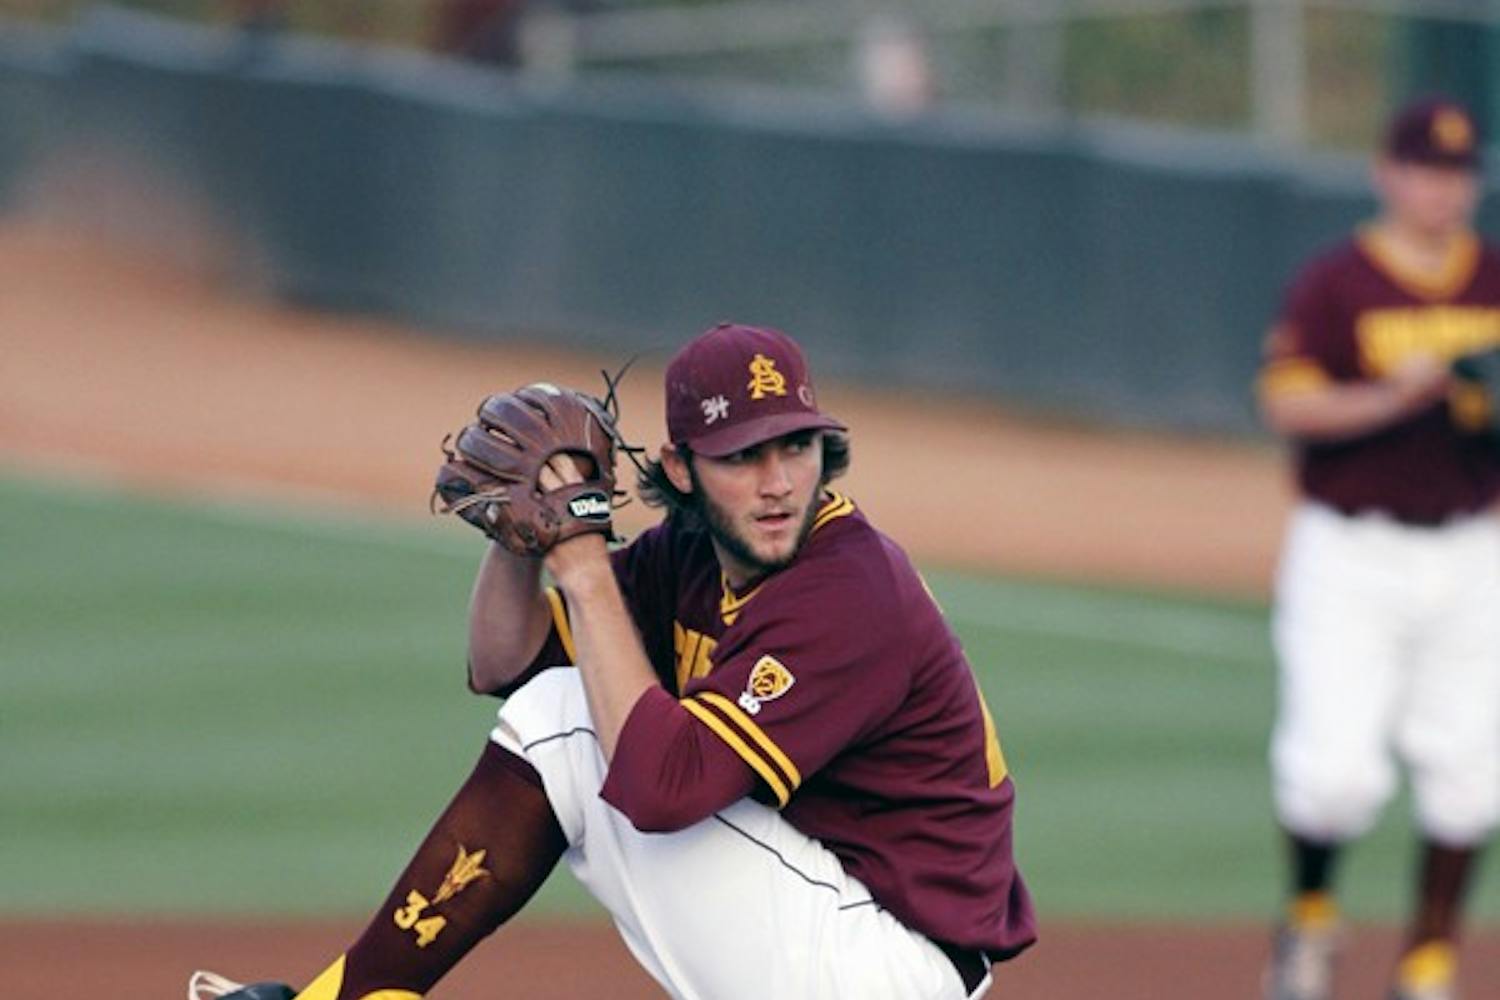 Trevor Williams prepares to deliver a pitch in a game against Oregon State on April 6. Williams pitched a four-hit, complete game shutout to help the Sun Devils sweep the Trojans last weekend. (Photo by Sam Rosenbaum)